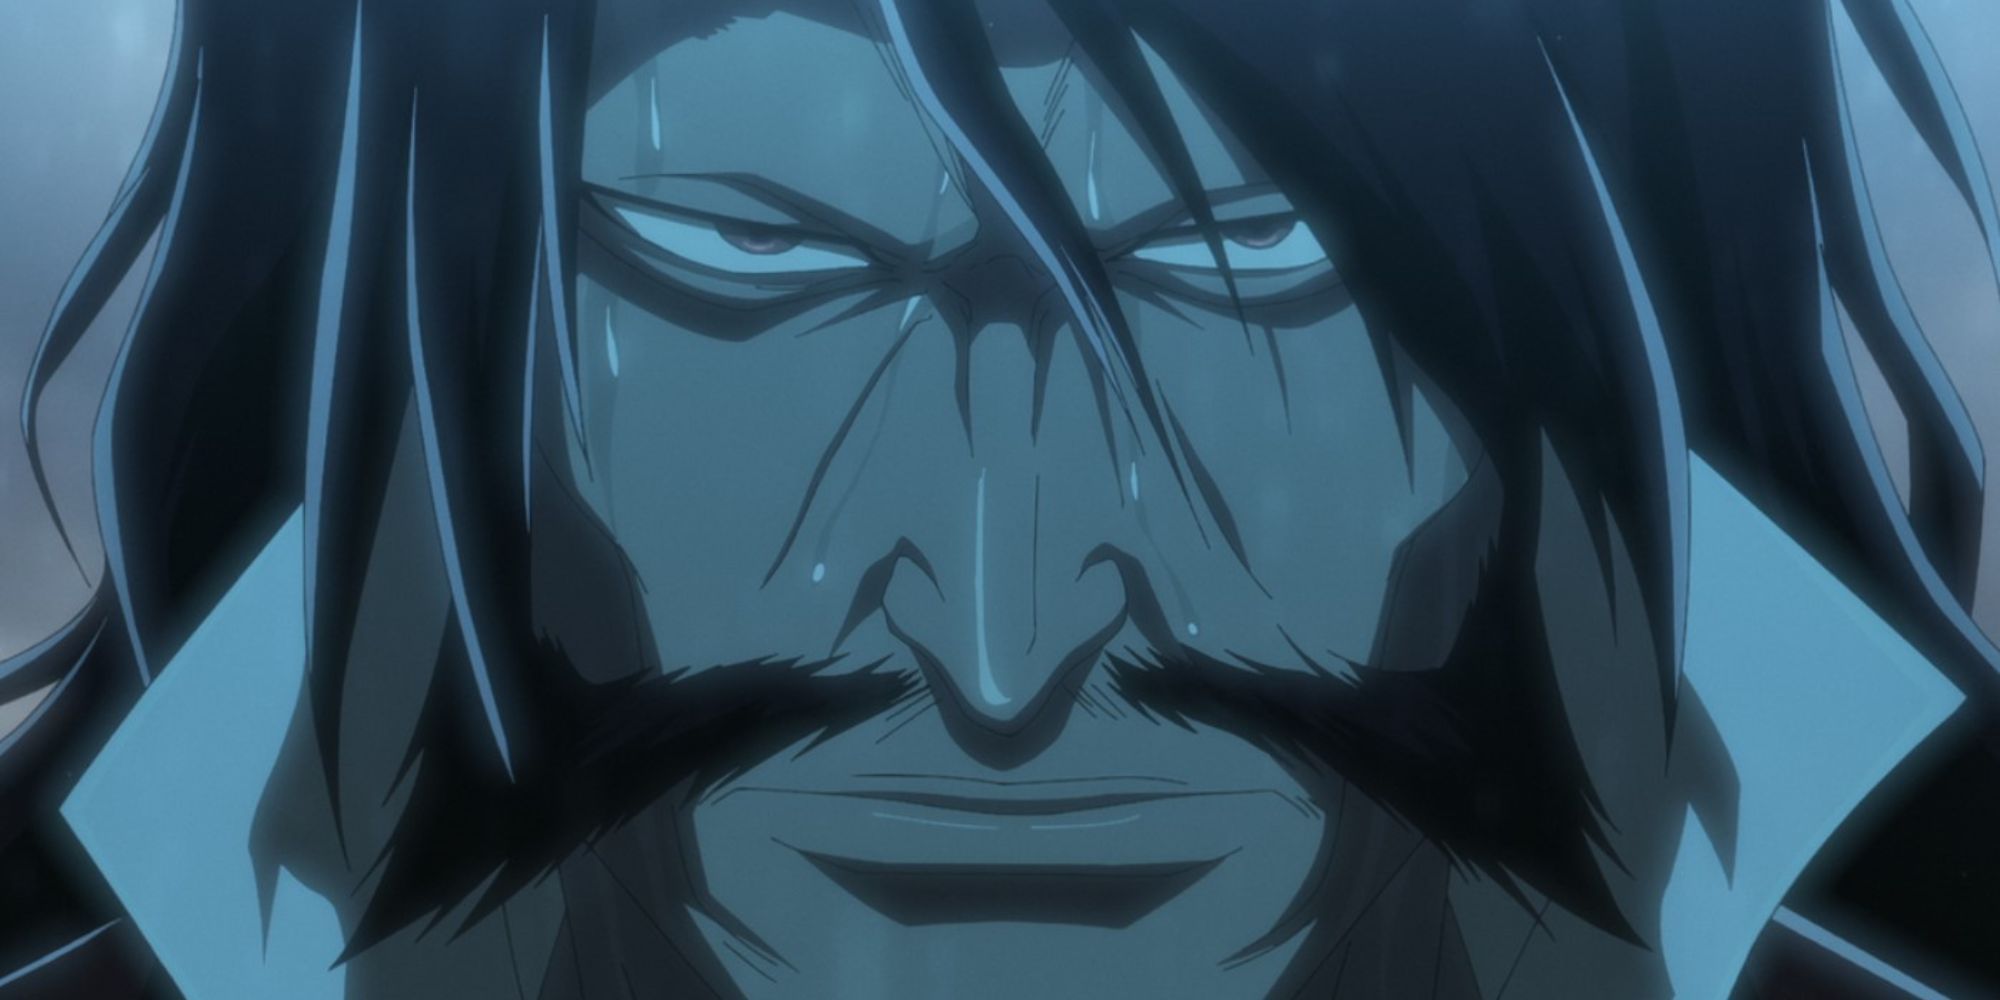 Bleach TYBW episode 7 release date, time confusion for 'Born in